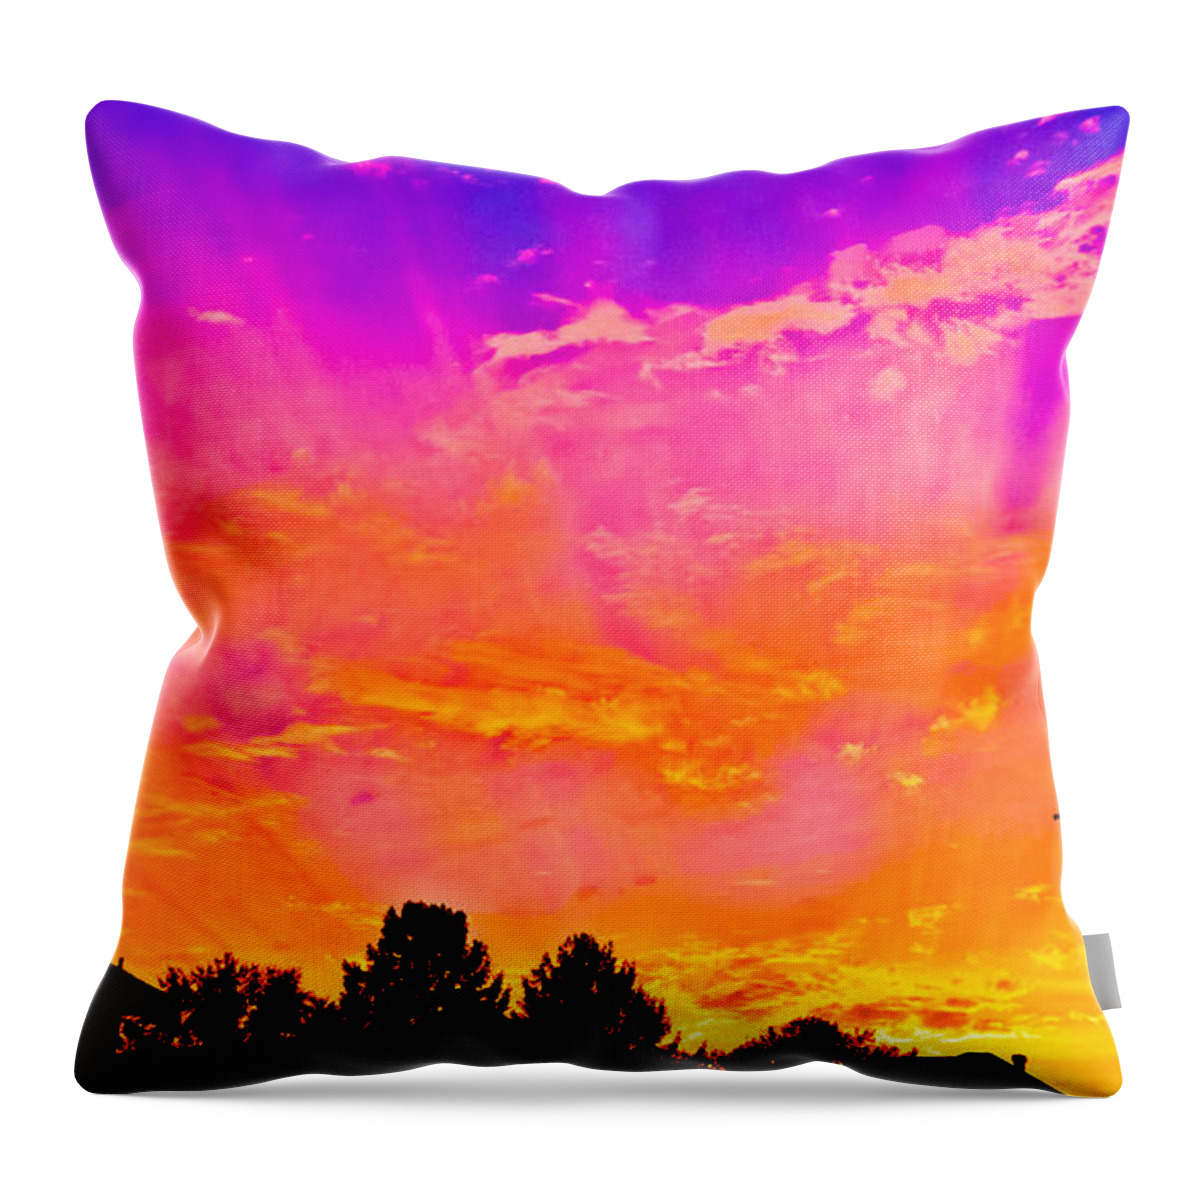 Colors Throw Pillow featuring the photograph Painted Sky by Jonny D